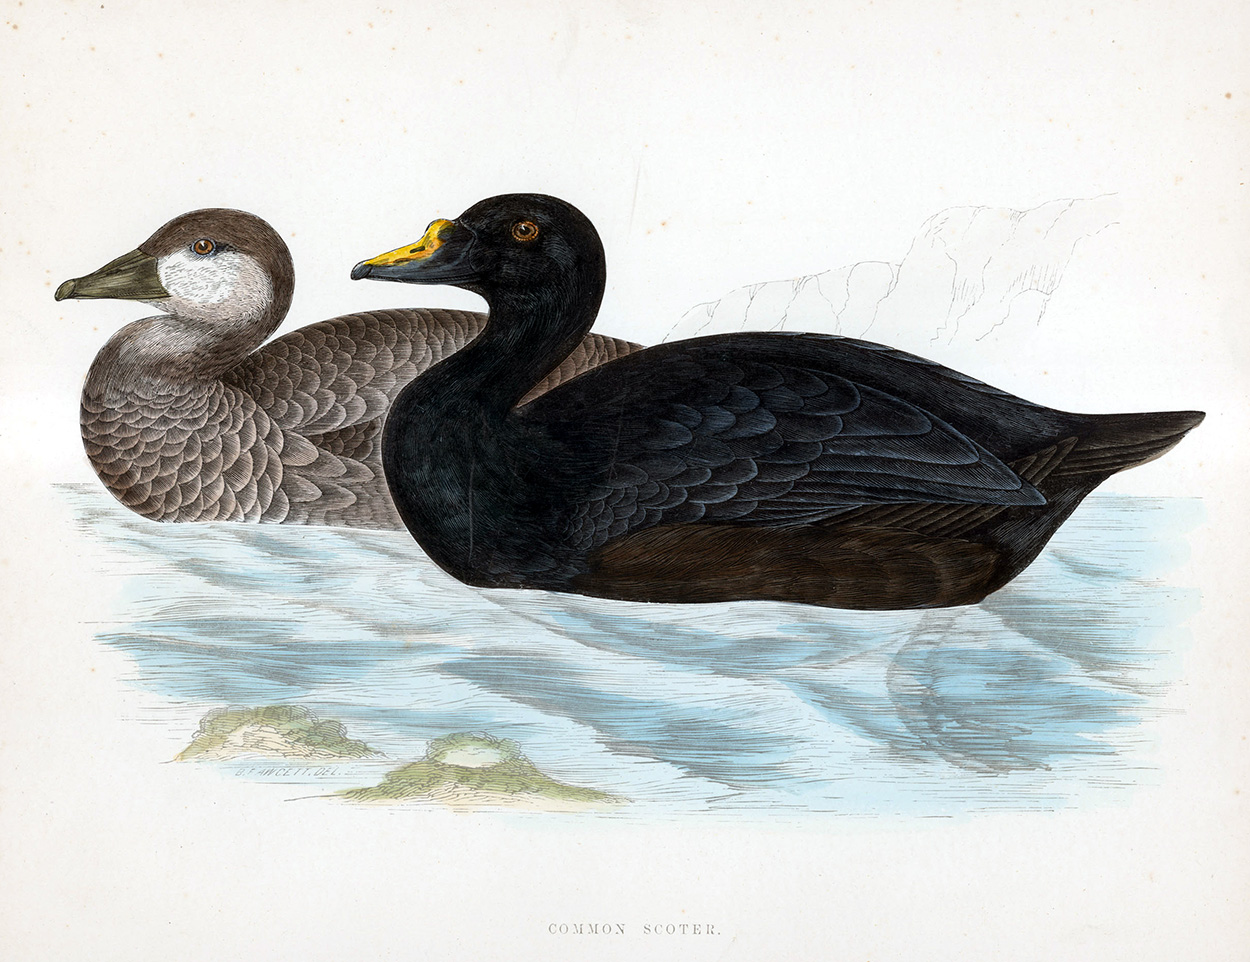 Common Scoter - hand coloured lithograph 1891 (Print) art by Beverley R Morris at The Illustration Art Gallery